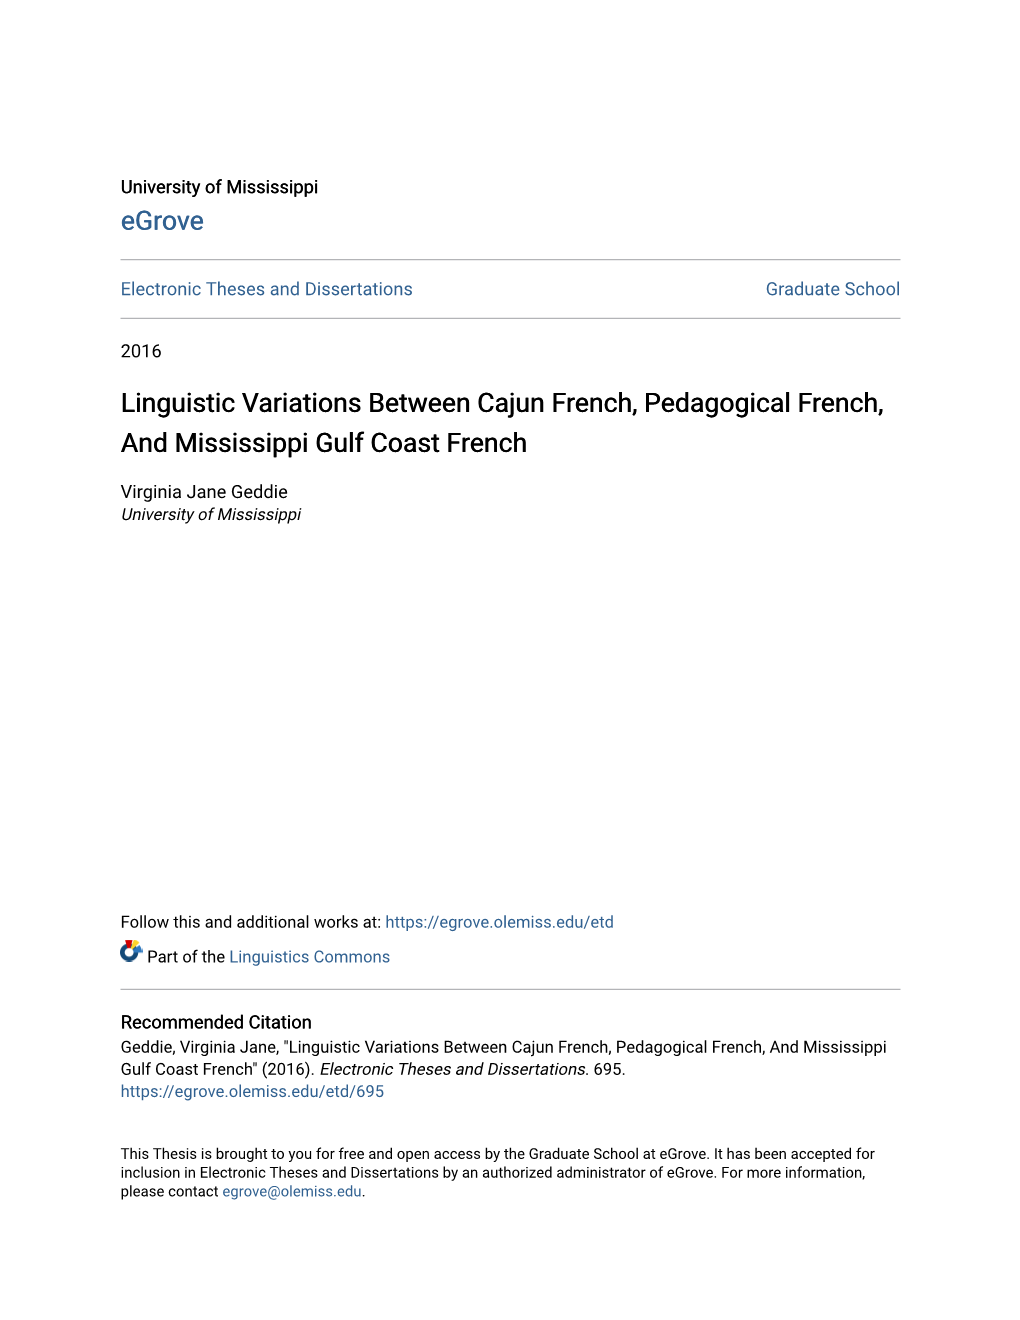 Linguistic Variations Between Cajun French, Pedagogical French, and Mississippi Gulf Coast French